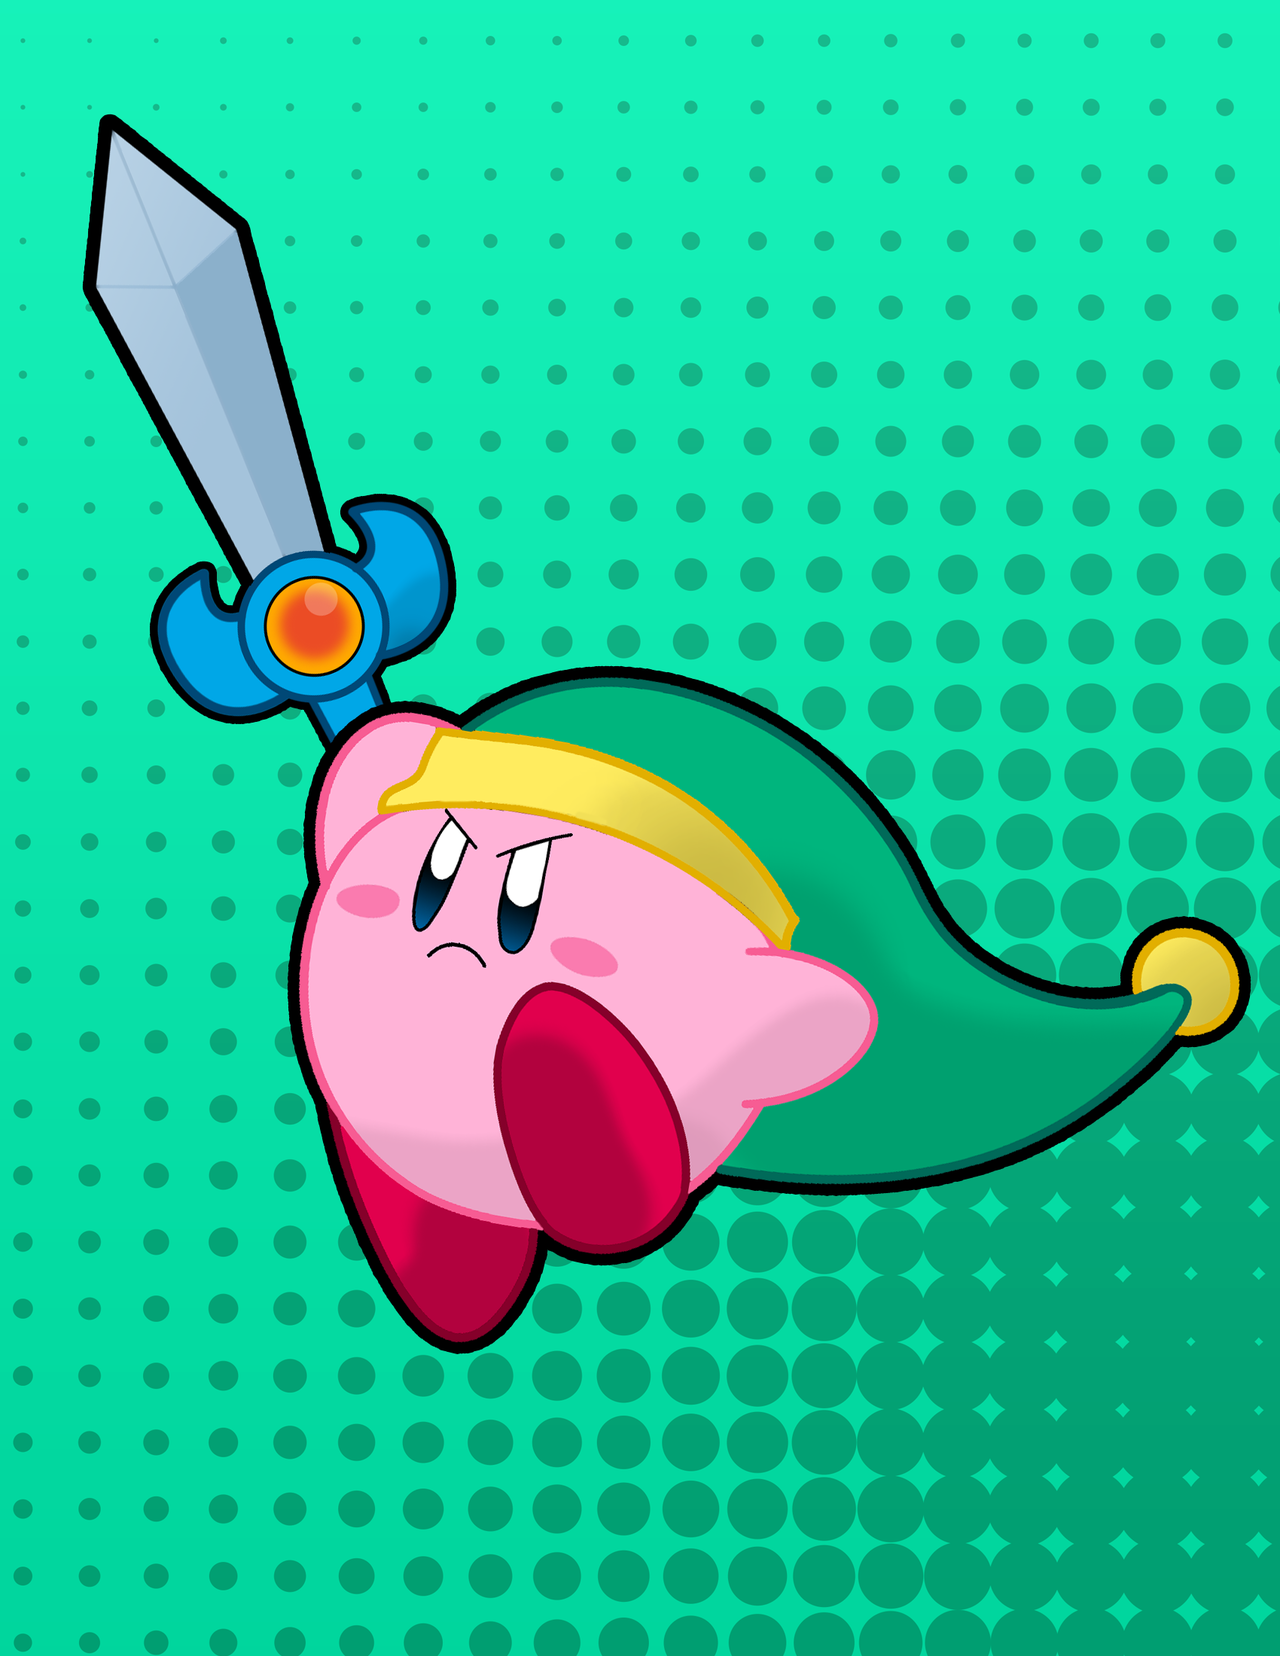 Fan Art Decided to get back into drawing. Here's Sword Kirby